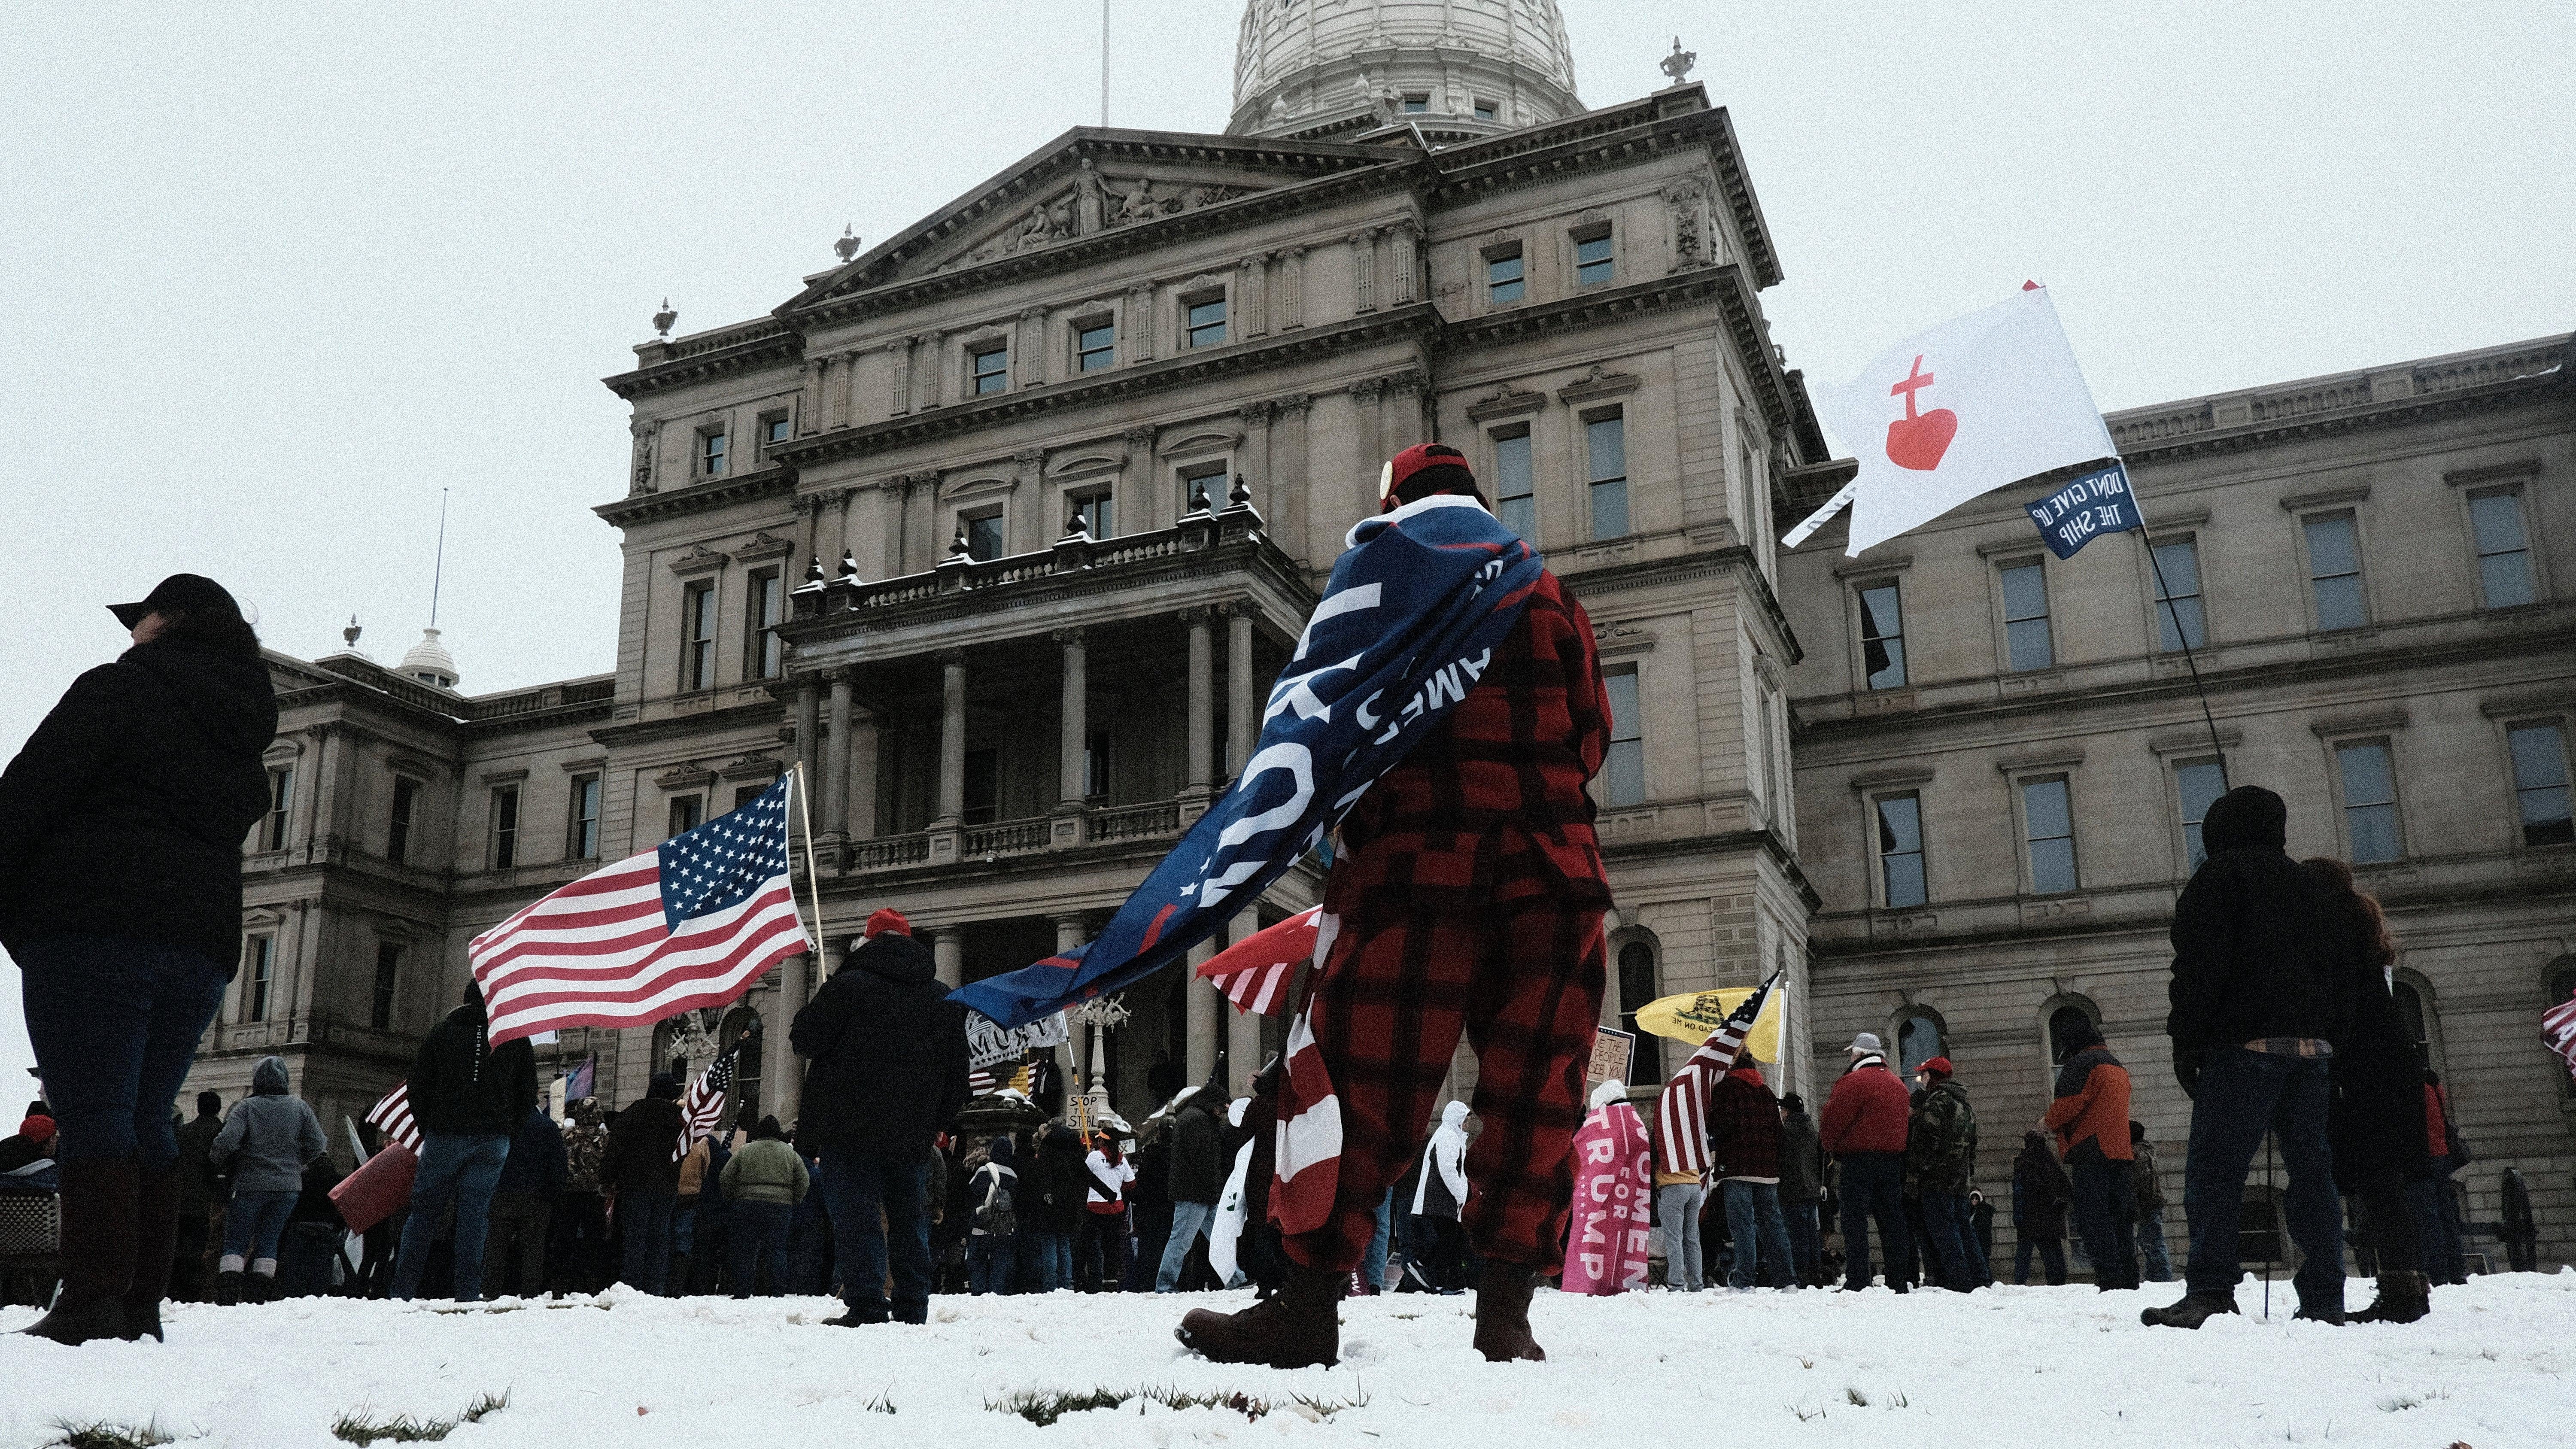  Donald Trump supporters gather around the Michigan State Capitol Building to protest the certification of Joe Biden as the next president of the United States on January 6, 2021 in Lansing, Michigan (Photo: Matthew Hatcher, Getty Images)